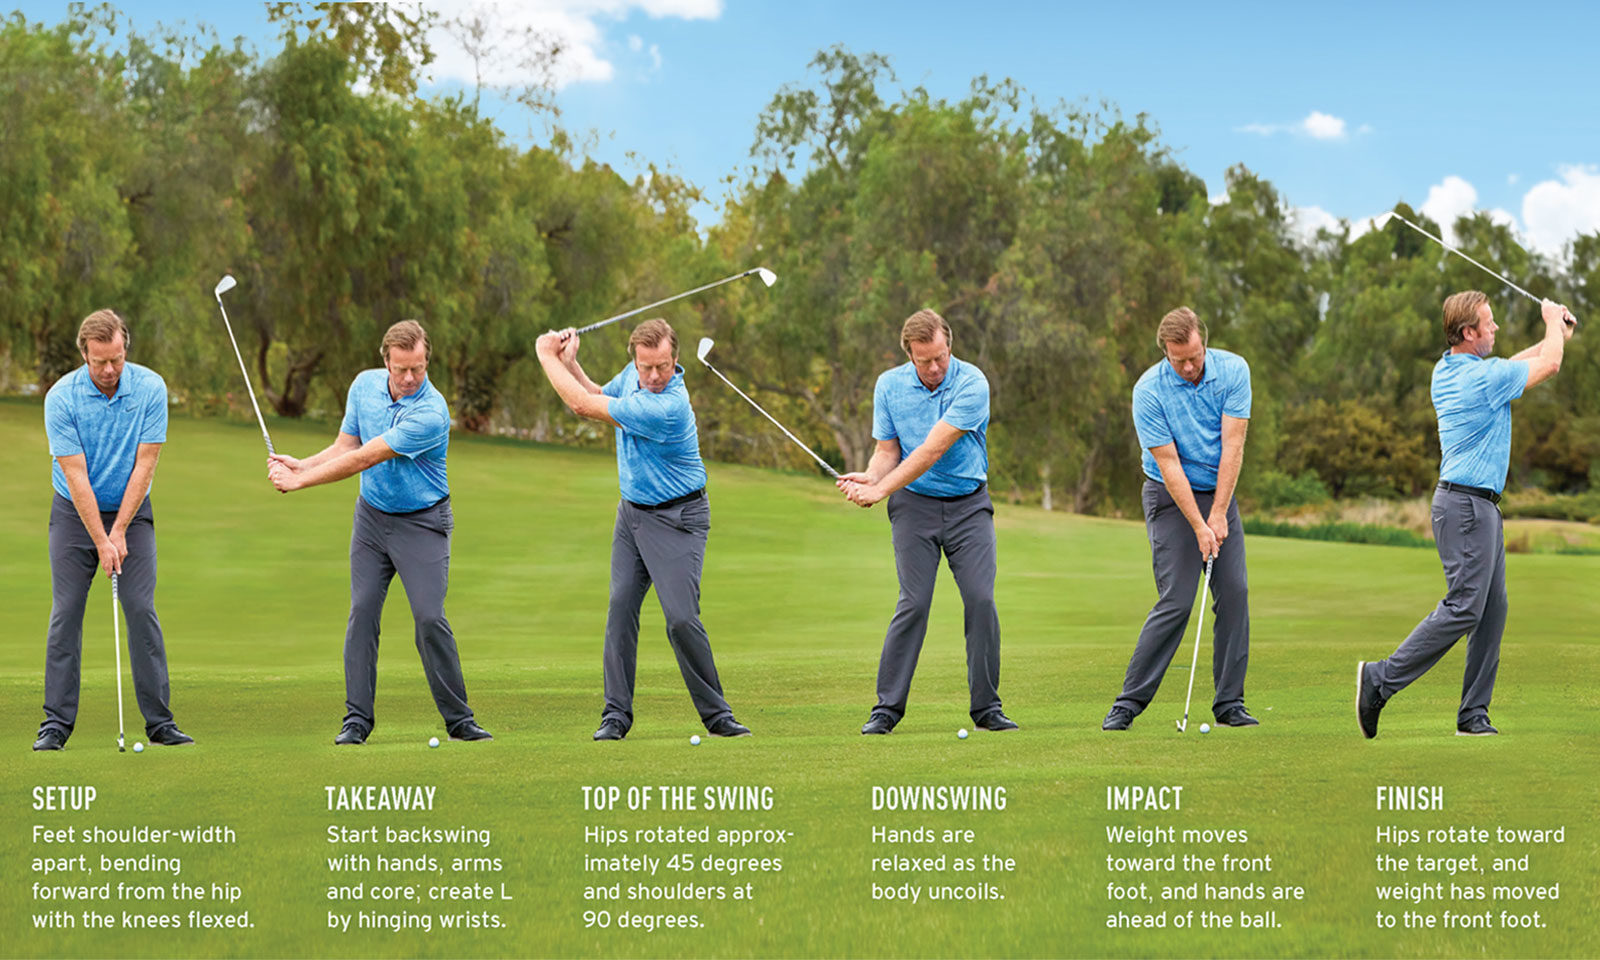 Oak Creek’s director of golf (and former PGA player), Duncan Simms, breaks down the six techniques of a perfect swing.